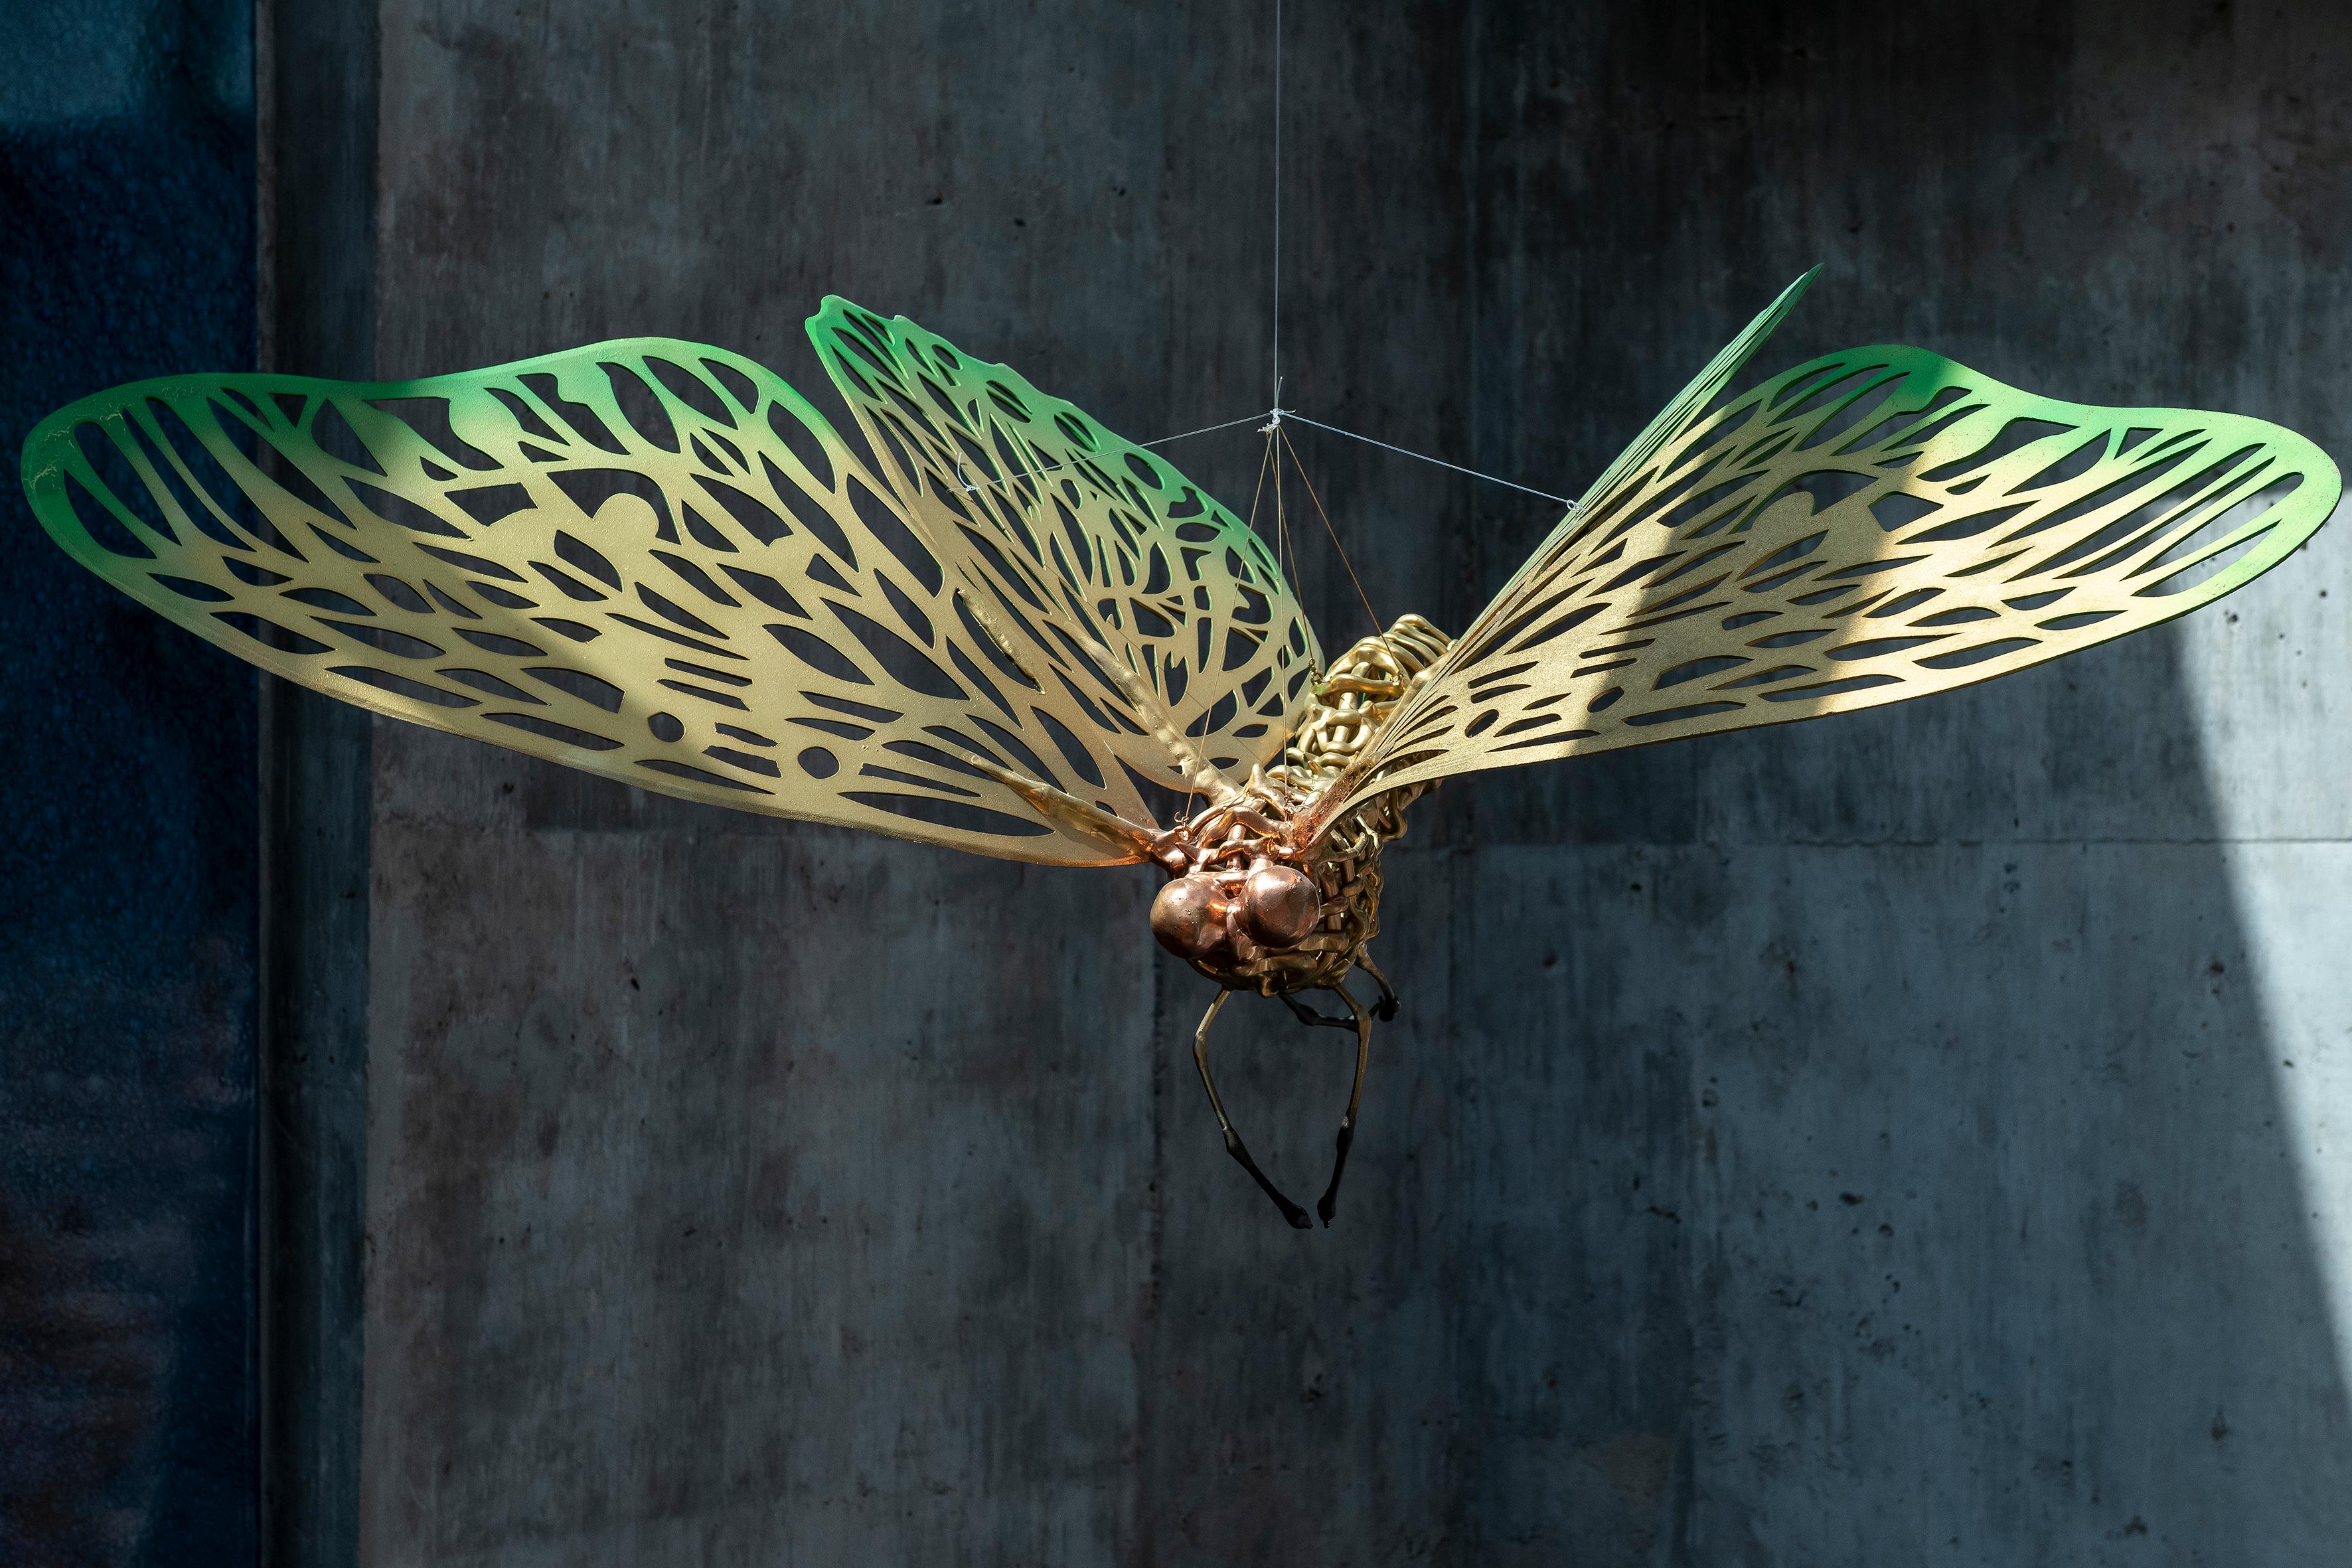 Handcut wood and epoxy butterfly by Andrés Paredes, Argentina, 2018.

